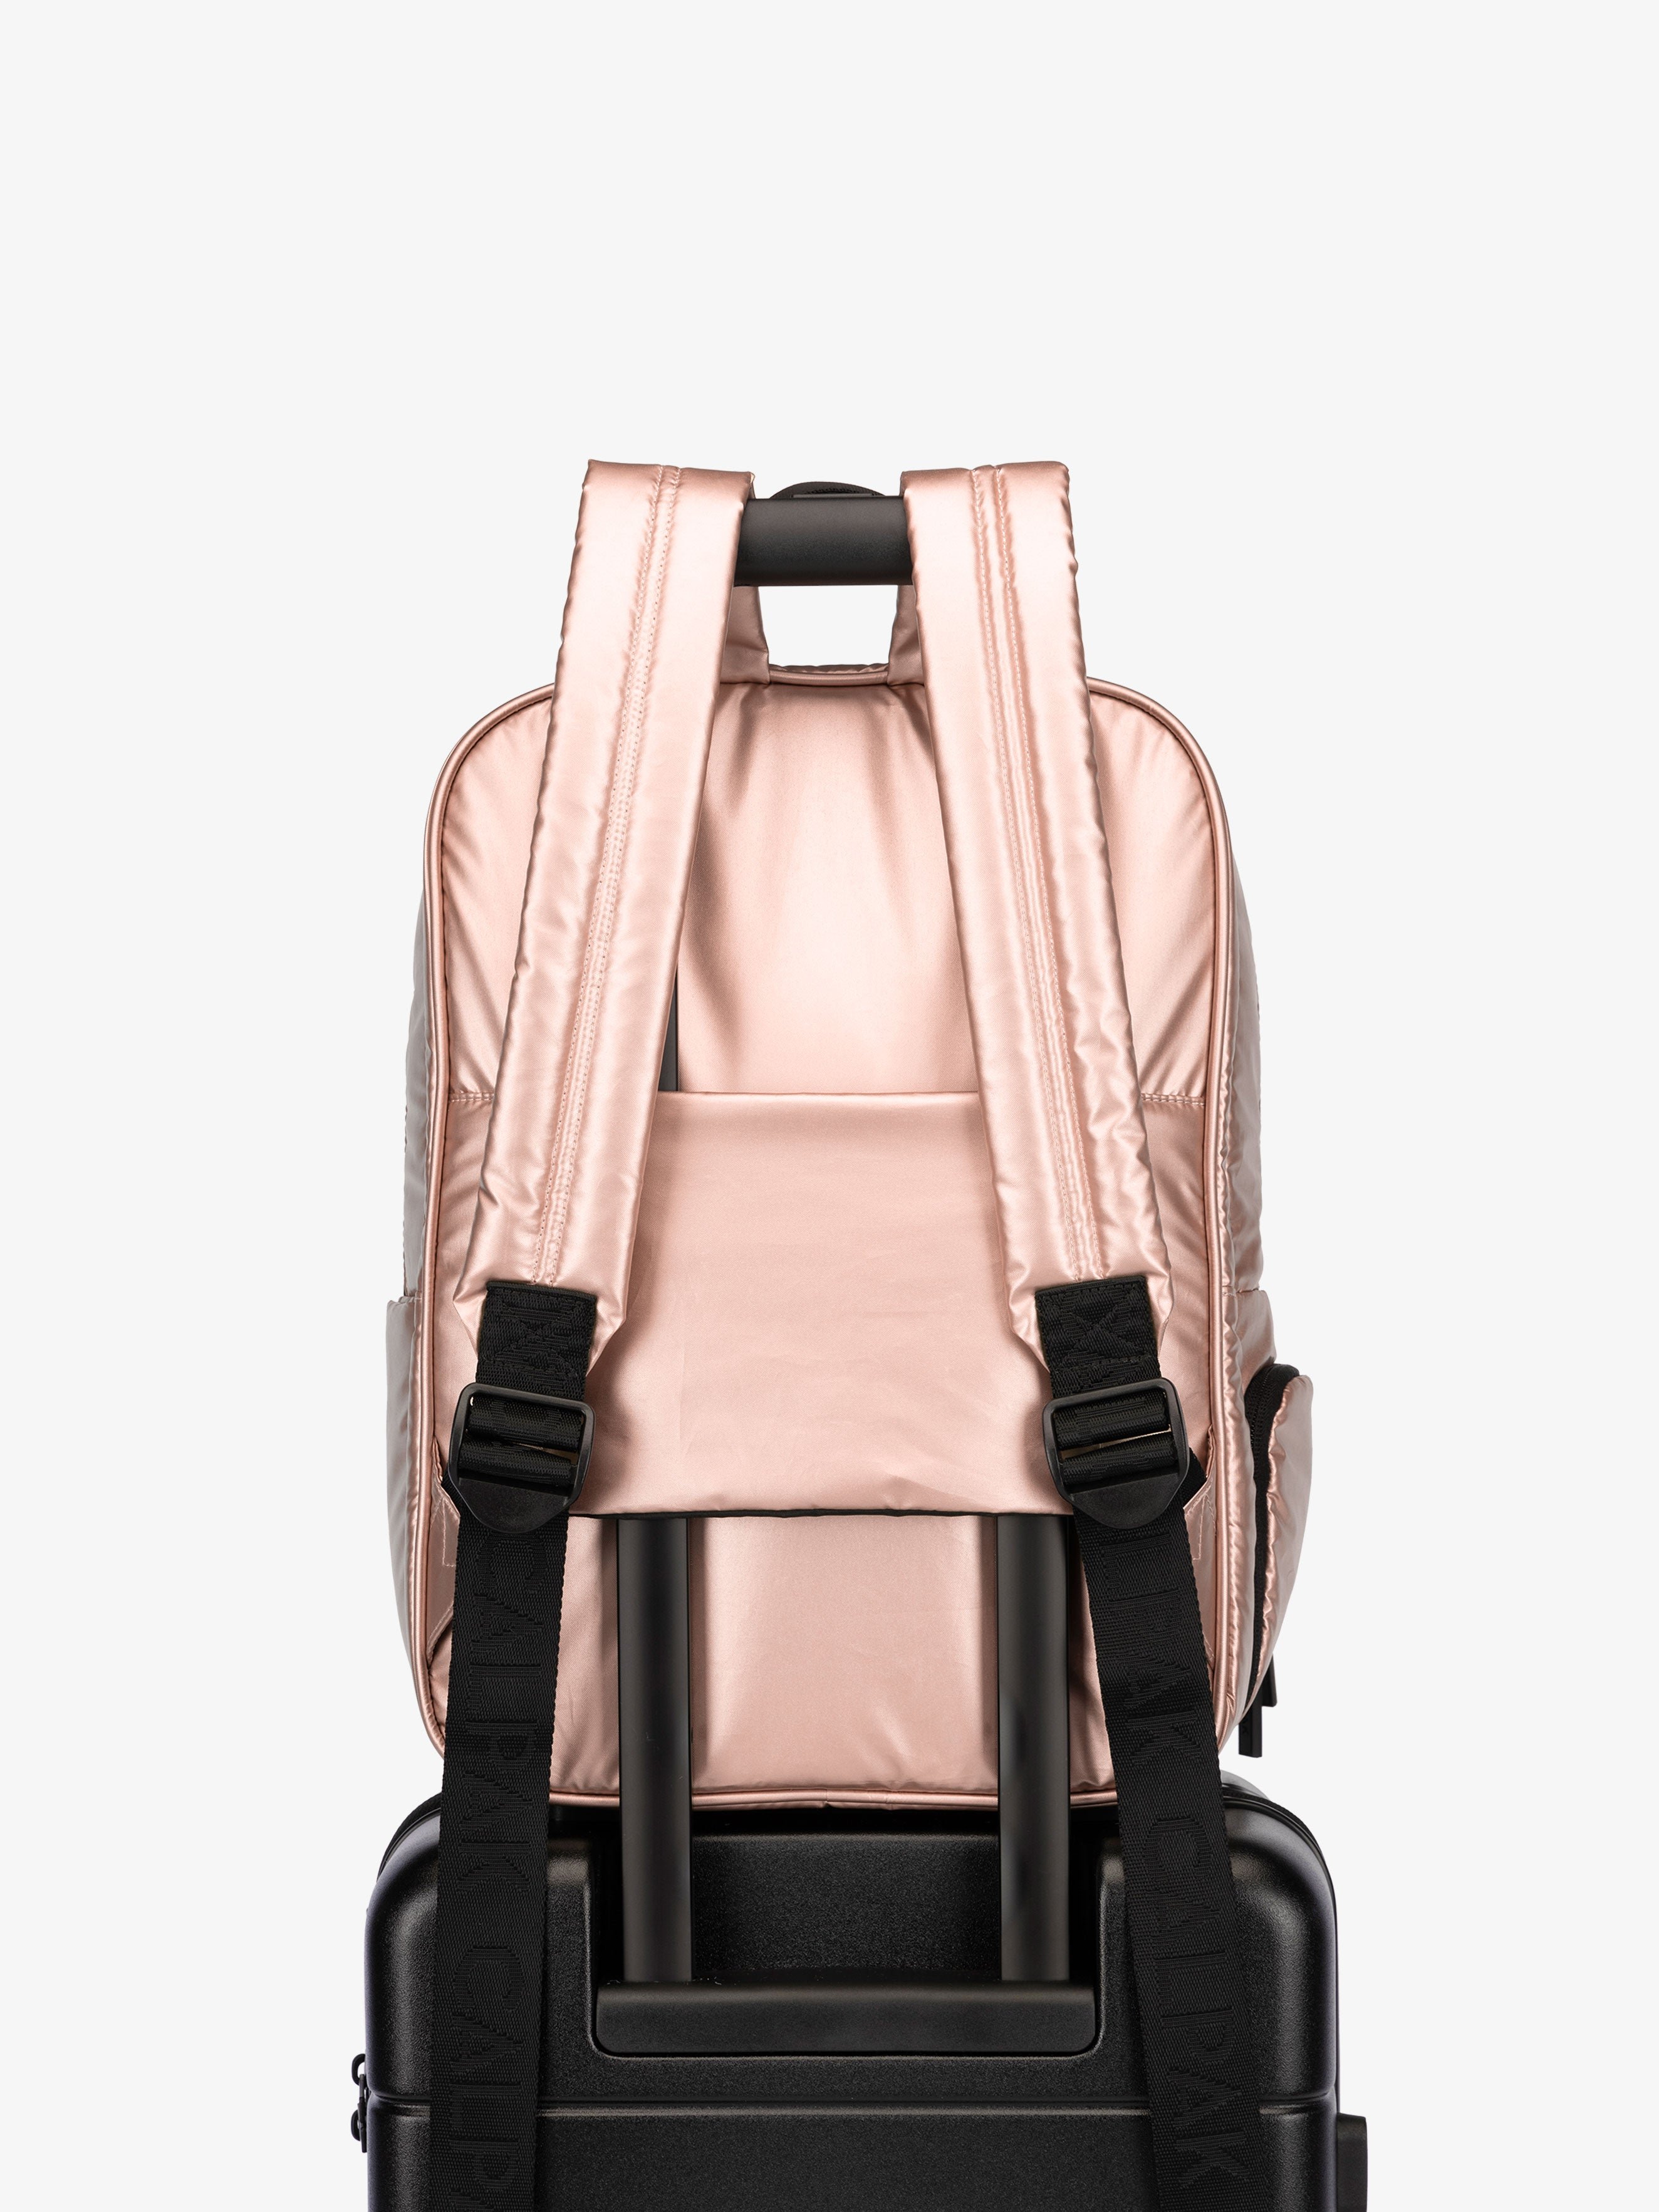 CALPAK water resistant Luka Laptop Backpack with adjustable shoulder straps and trolley sleeve in shiny rose gold